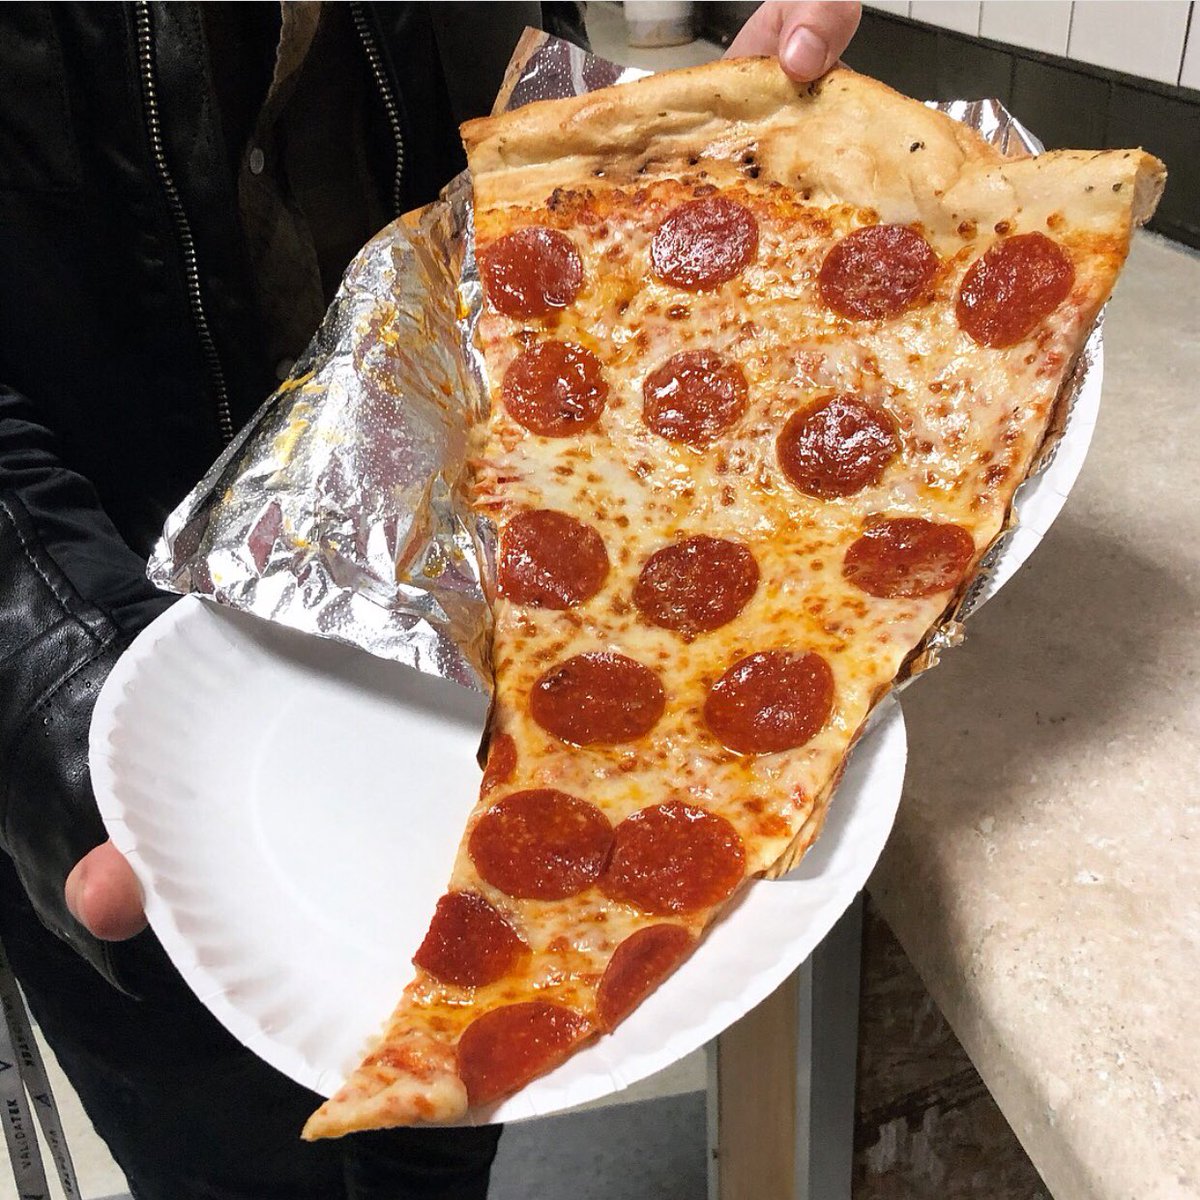 Power 106 What In The Costco Pizza Is Going On Here Your Friend Who Could Finish This Slice District Food Ig T Co 1m9lxu07dg